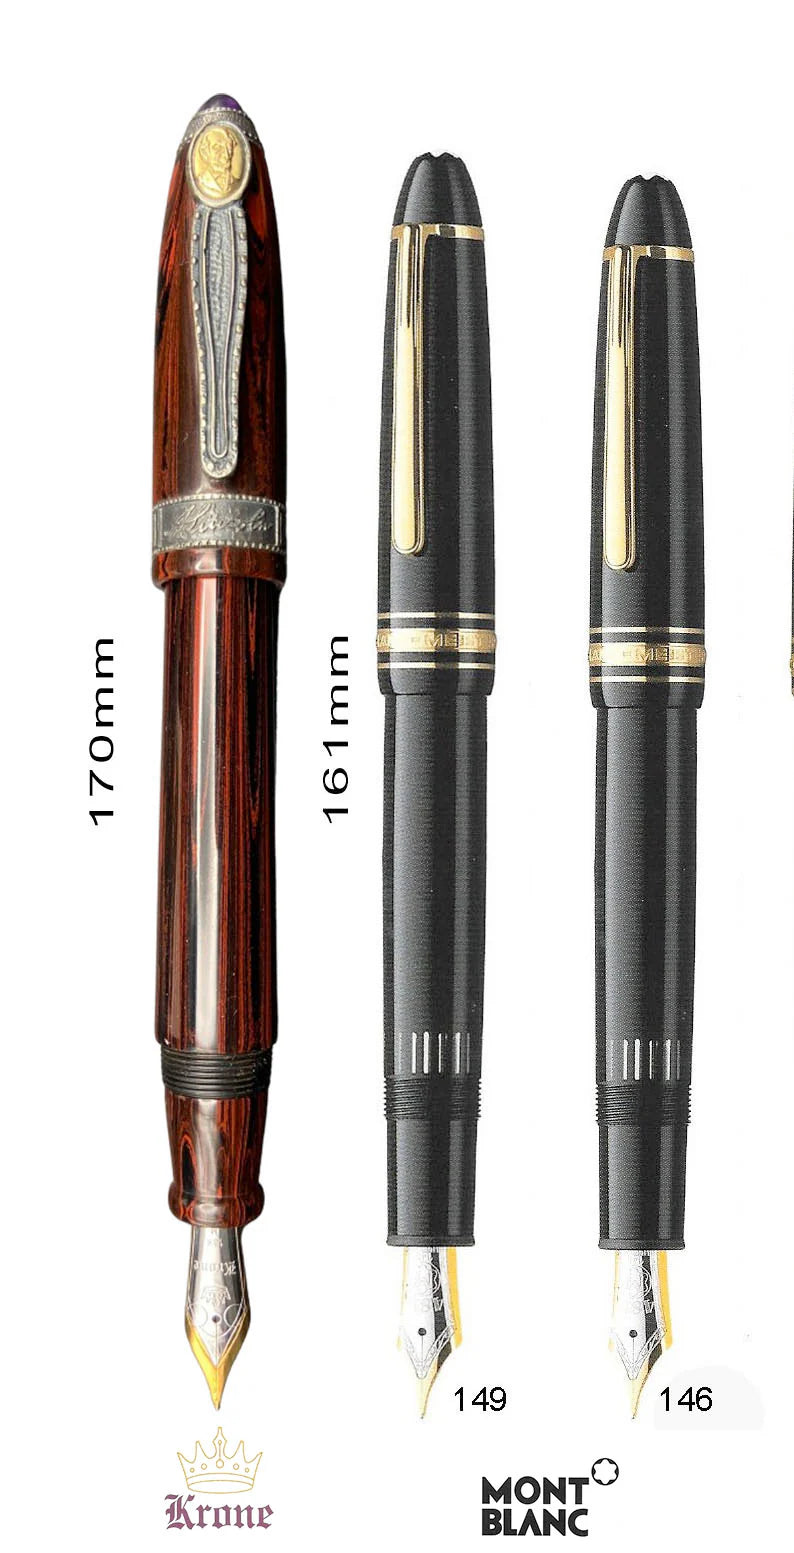 Krone Limited Edition Abraham Lincoln Fountain Pen